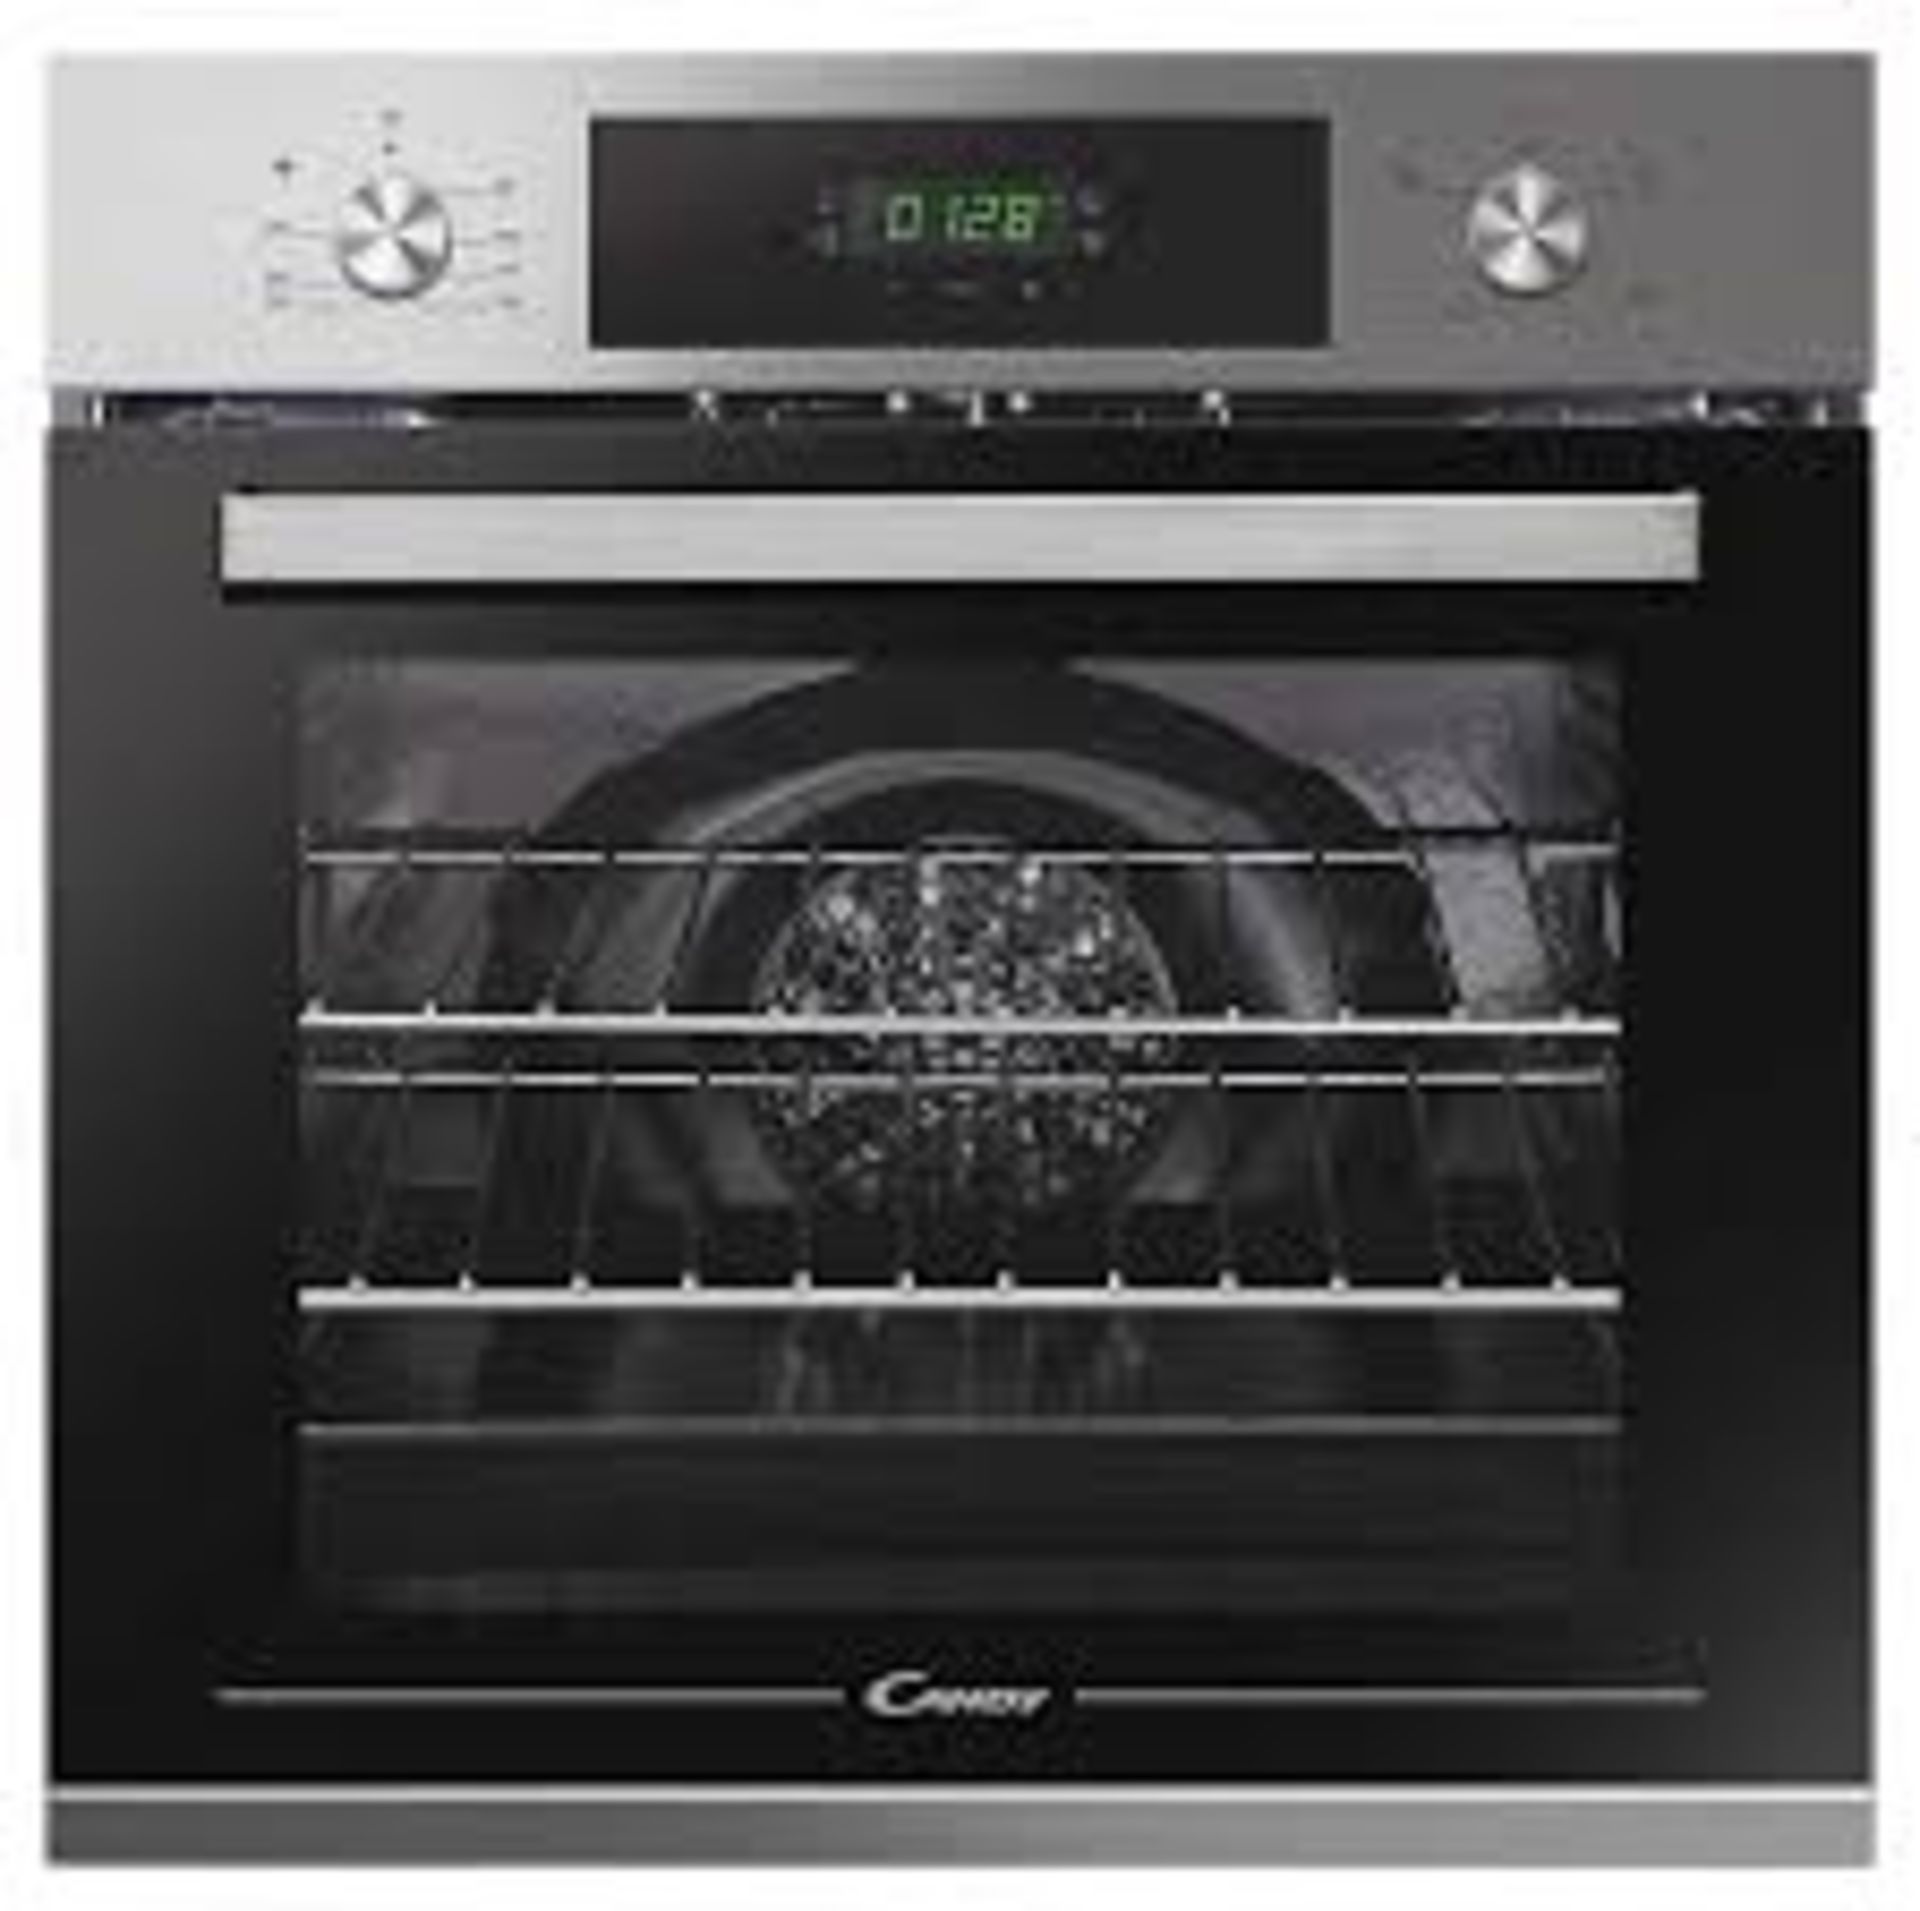 Candy Timeless FCT405X Built-in Single Fan Oven. - P4 *no door*